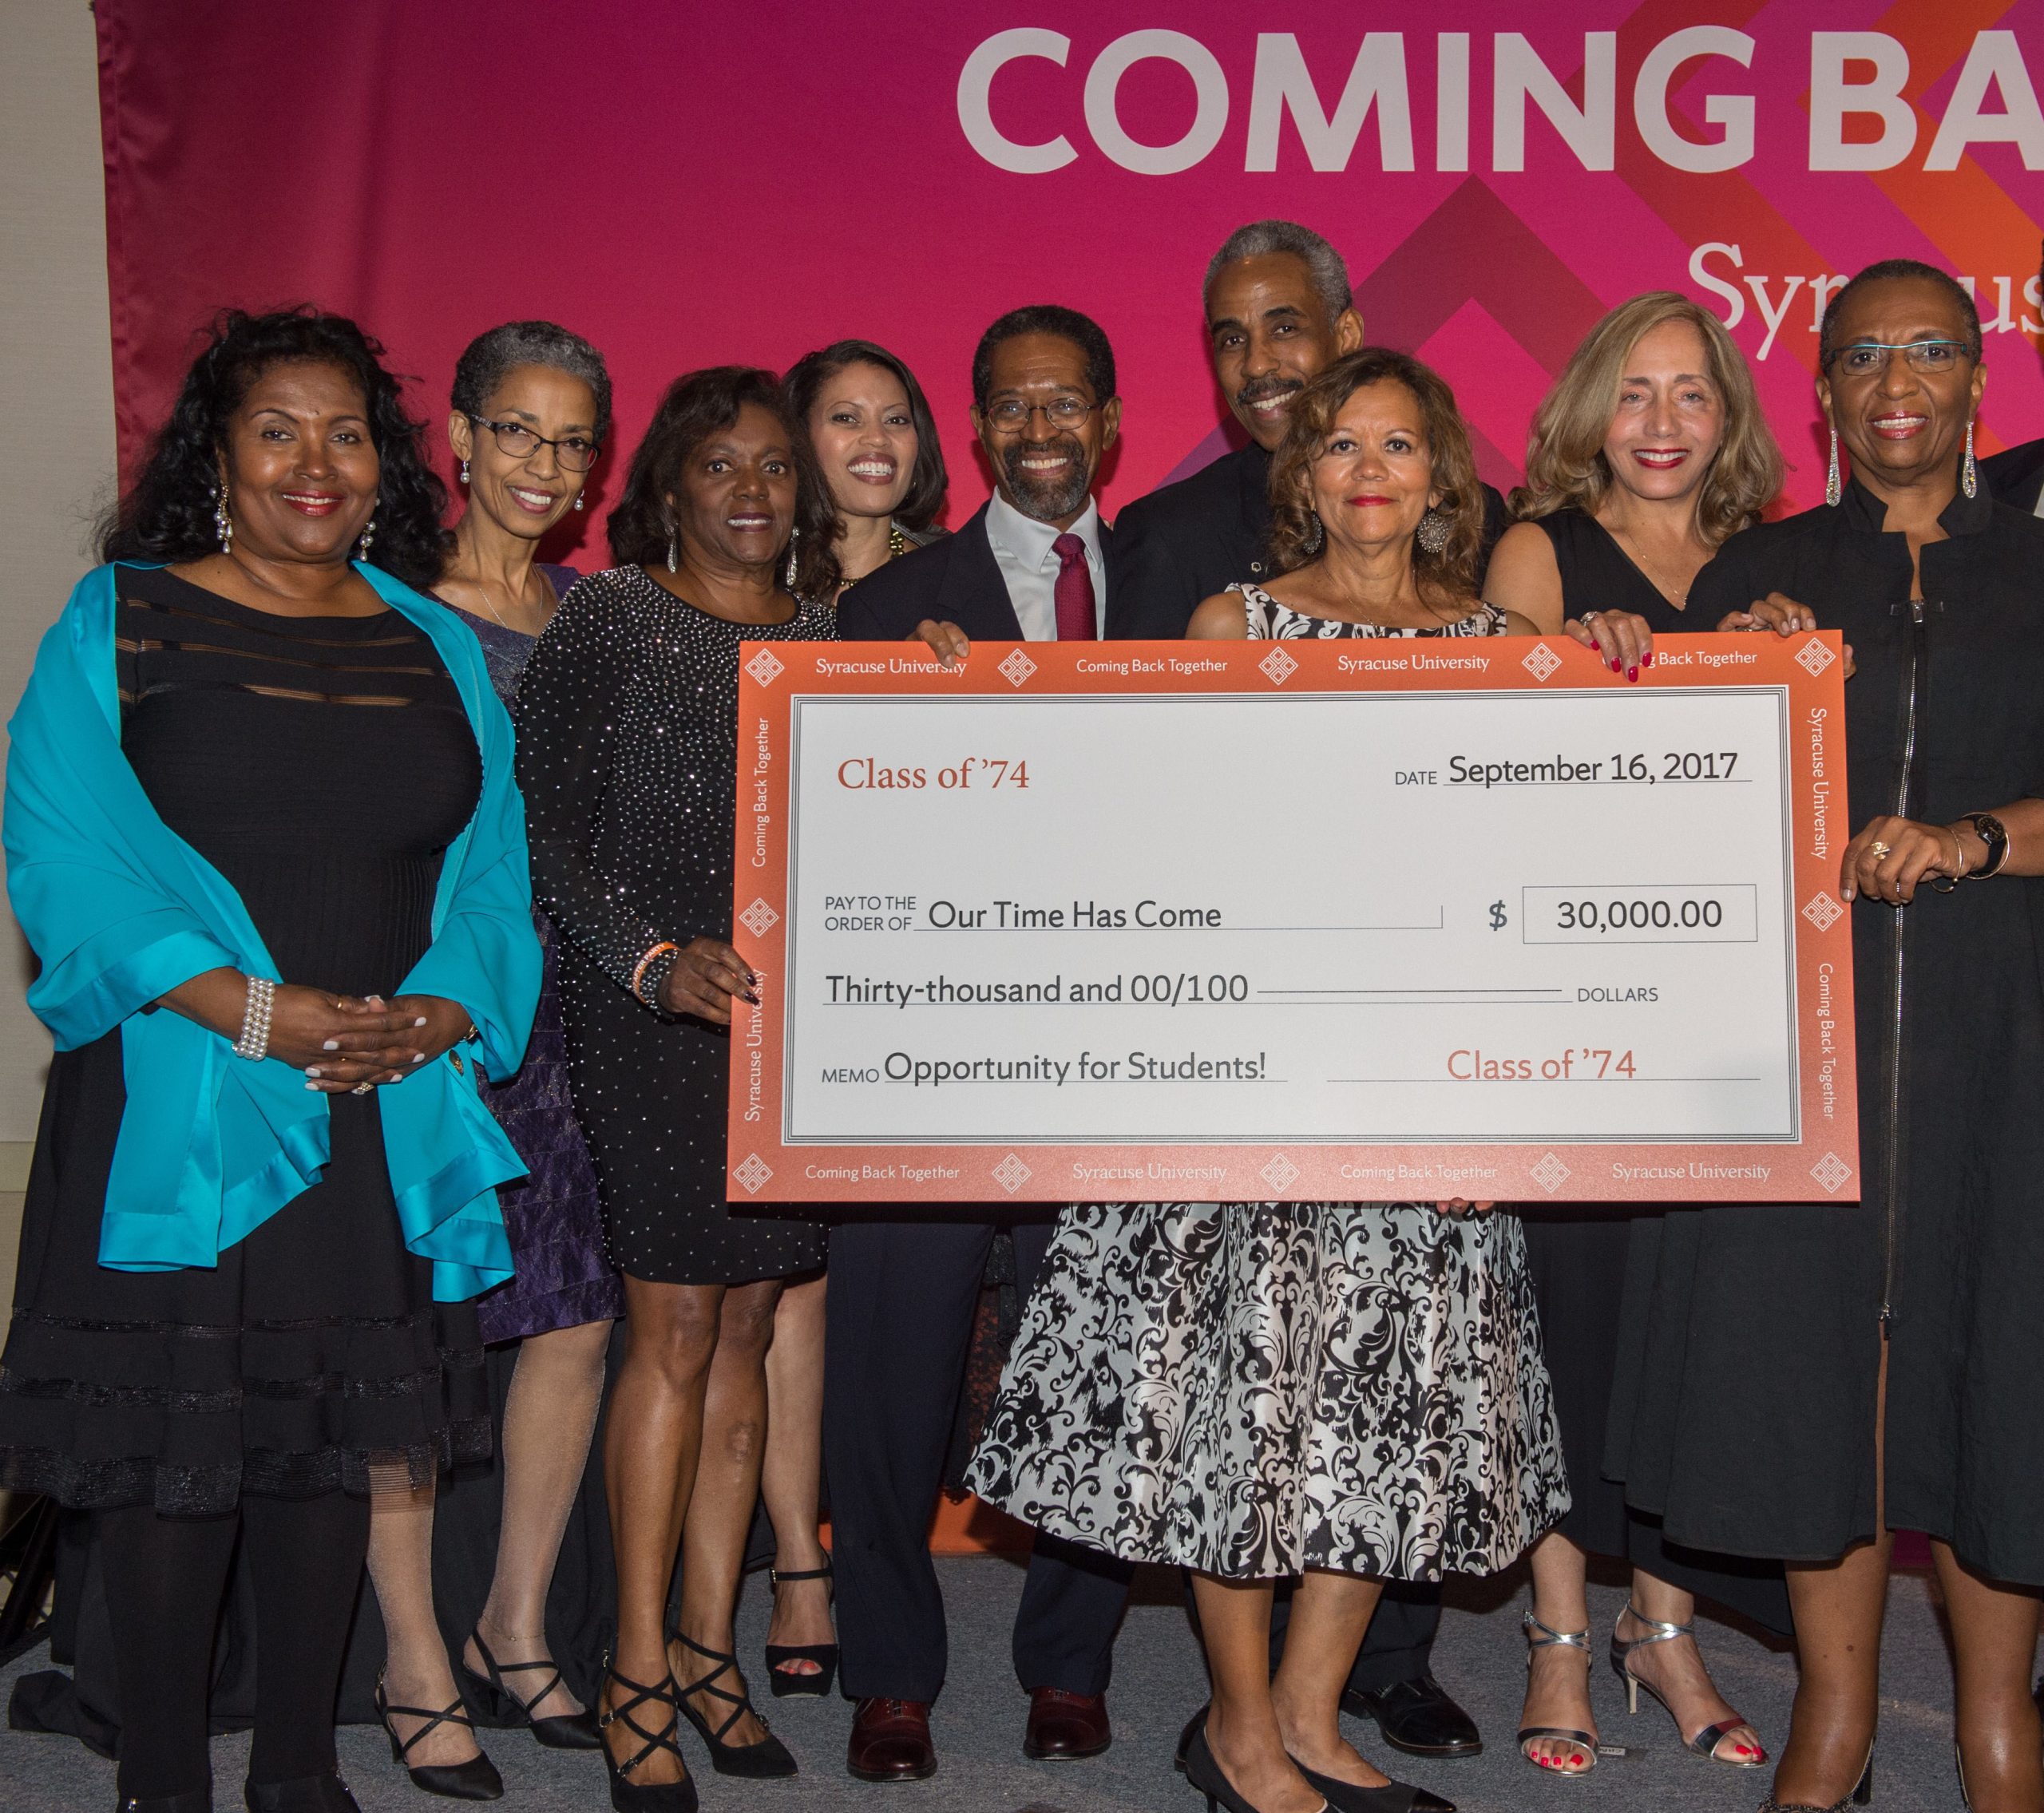 Large group of people standing together on a stage holding an oversized check